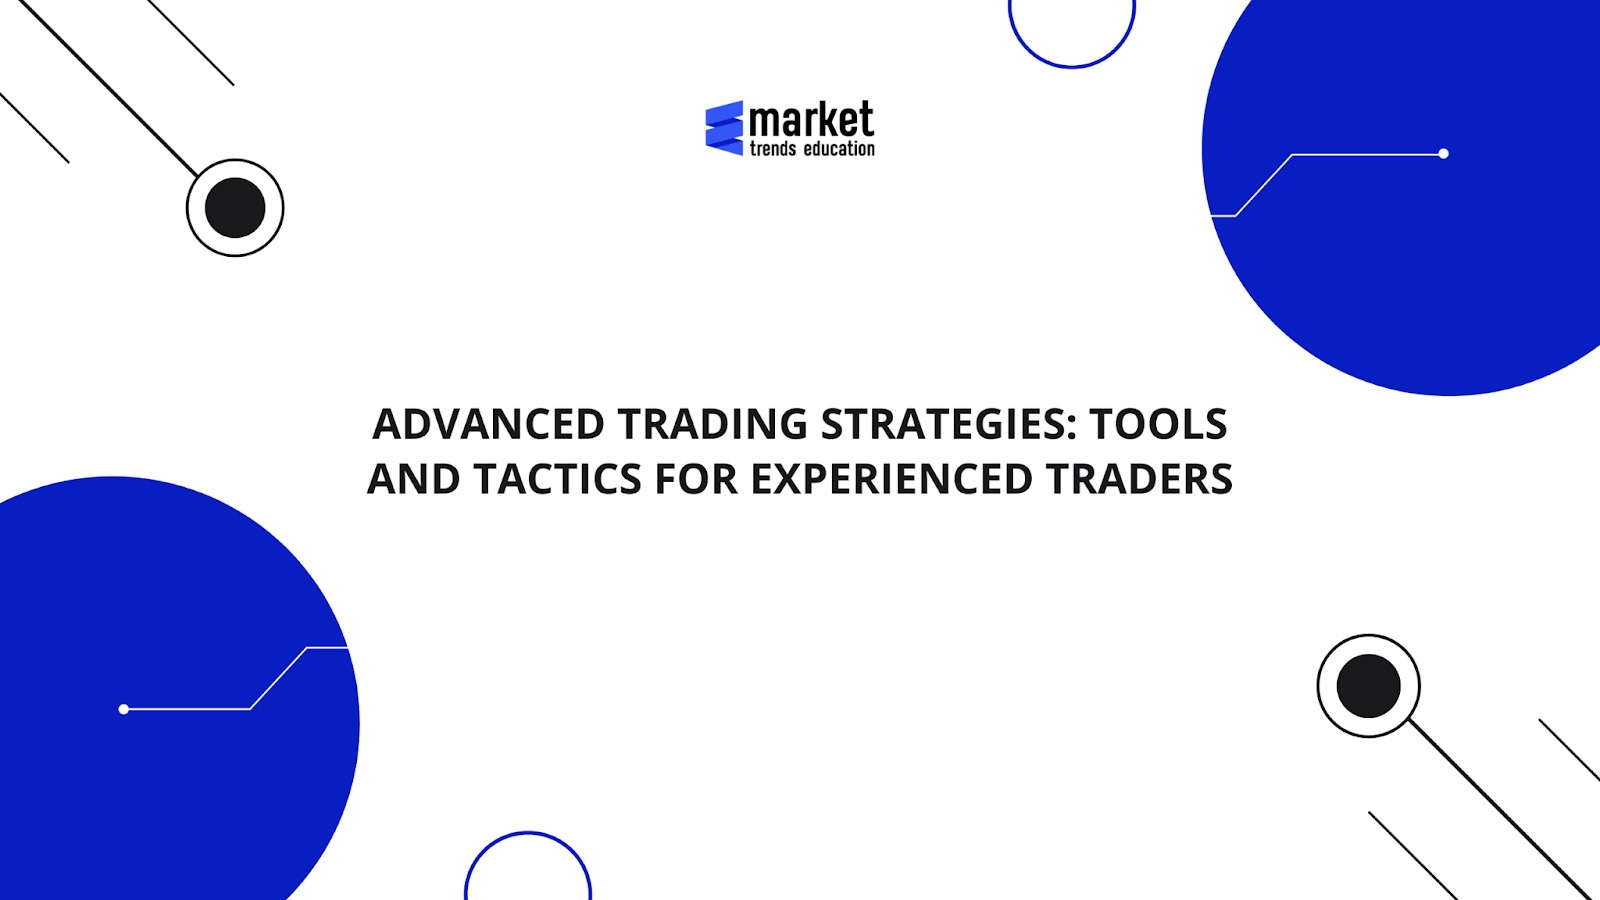 Advanced Trading Strategies: Tools and Tactics for Experienced Traders